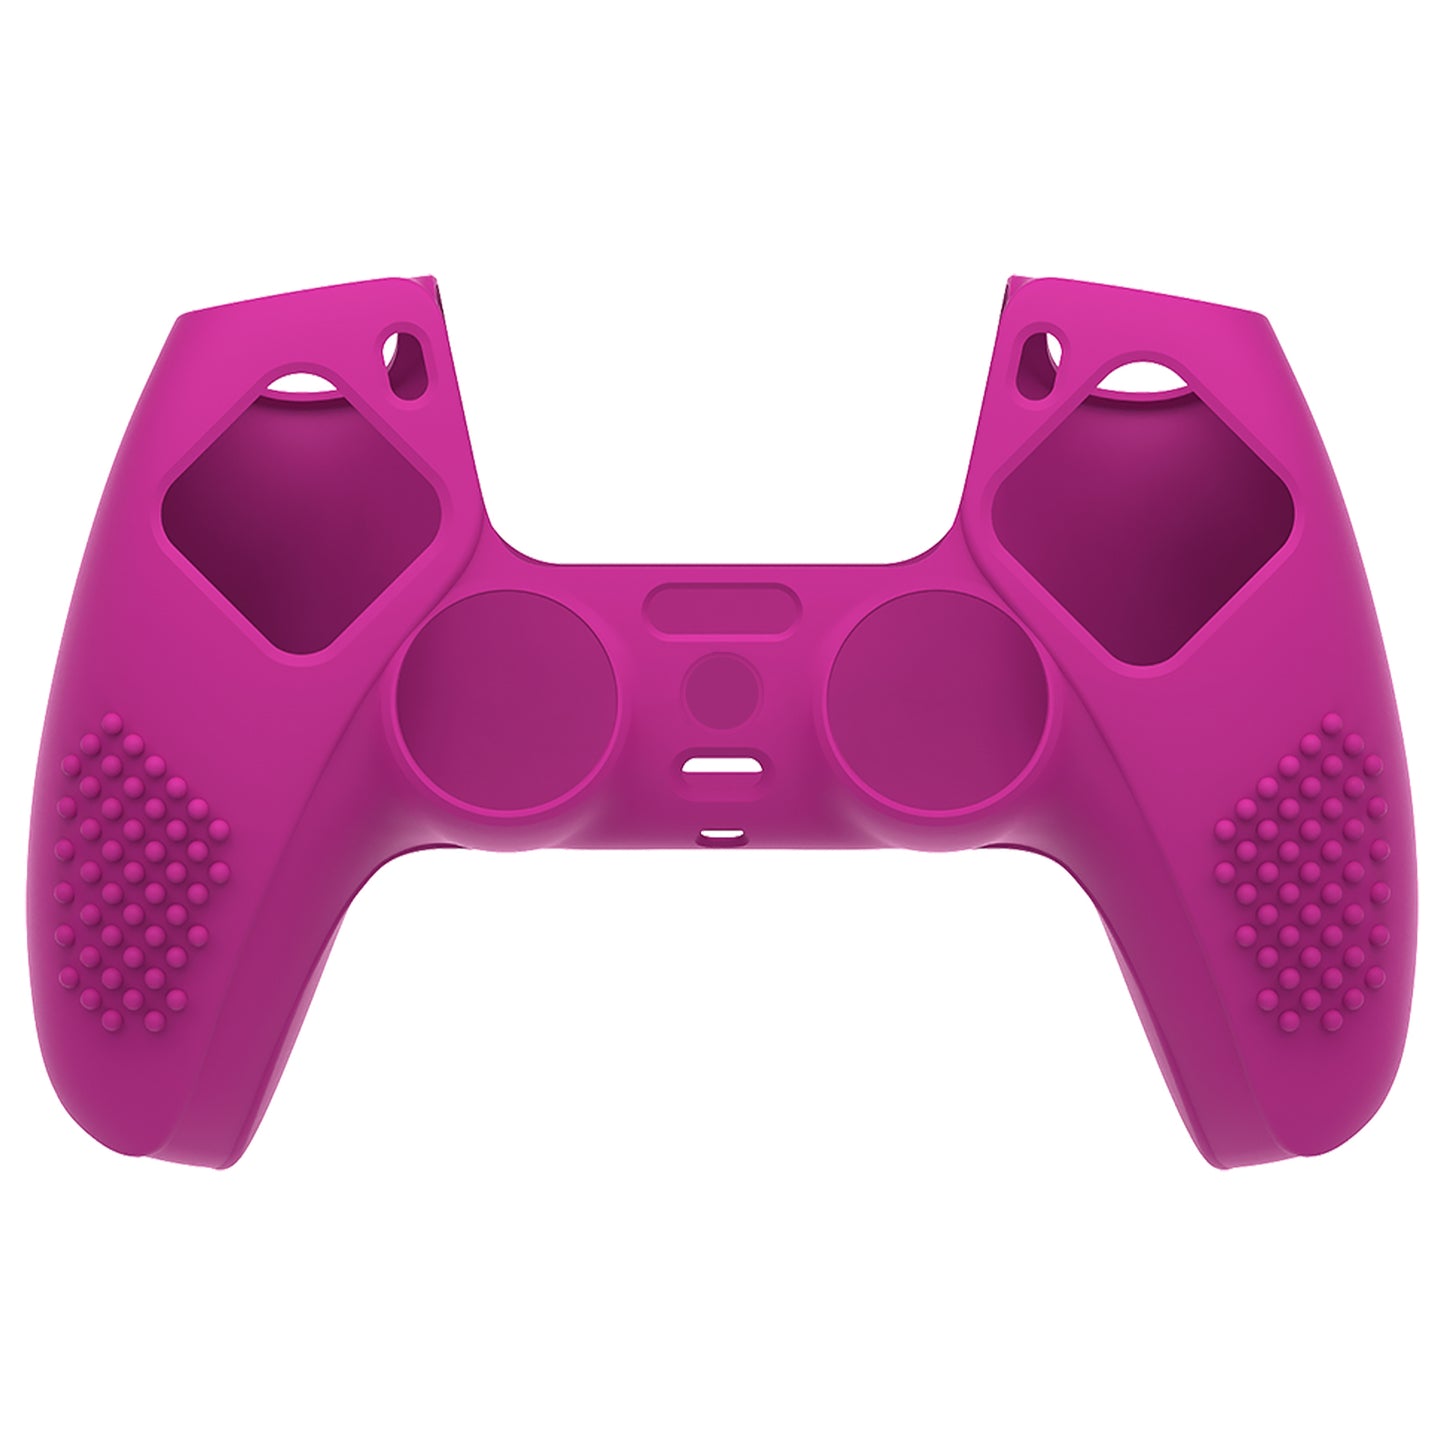 PlayVital 3D Studded Edition Anti-Slip Silicone Cover Skin with Thumb Grip Caps for PS5 Wireless Controller - Neon Purple - TDPF033 PlayVital